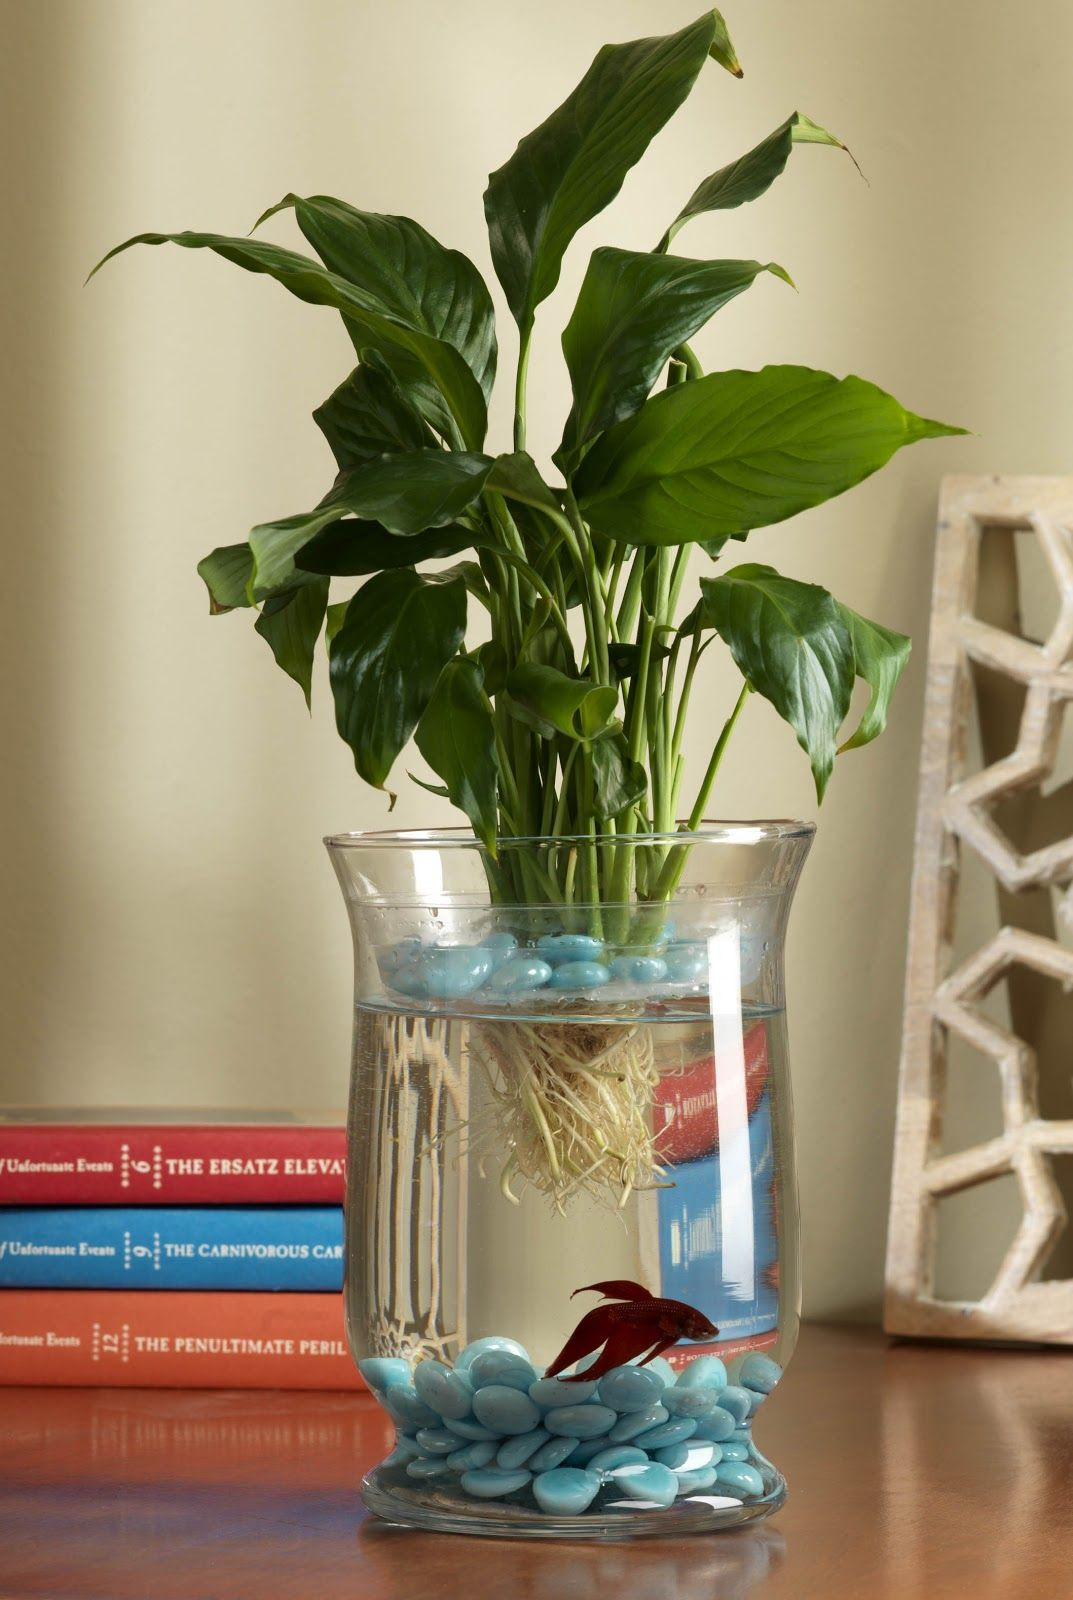 15 Stunning Plant Vase Fish Tank 2023 free download plant vase fish tank of create a living eco system did you know the peace lily plant acts within create a living eco system did you know the peace lily plant acts as a natural air purifier i